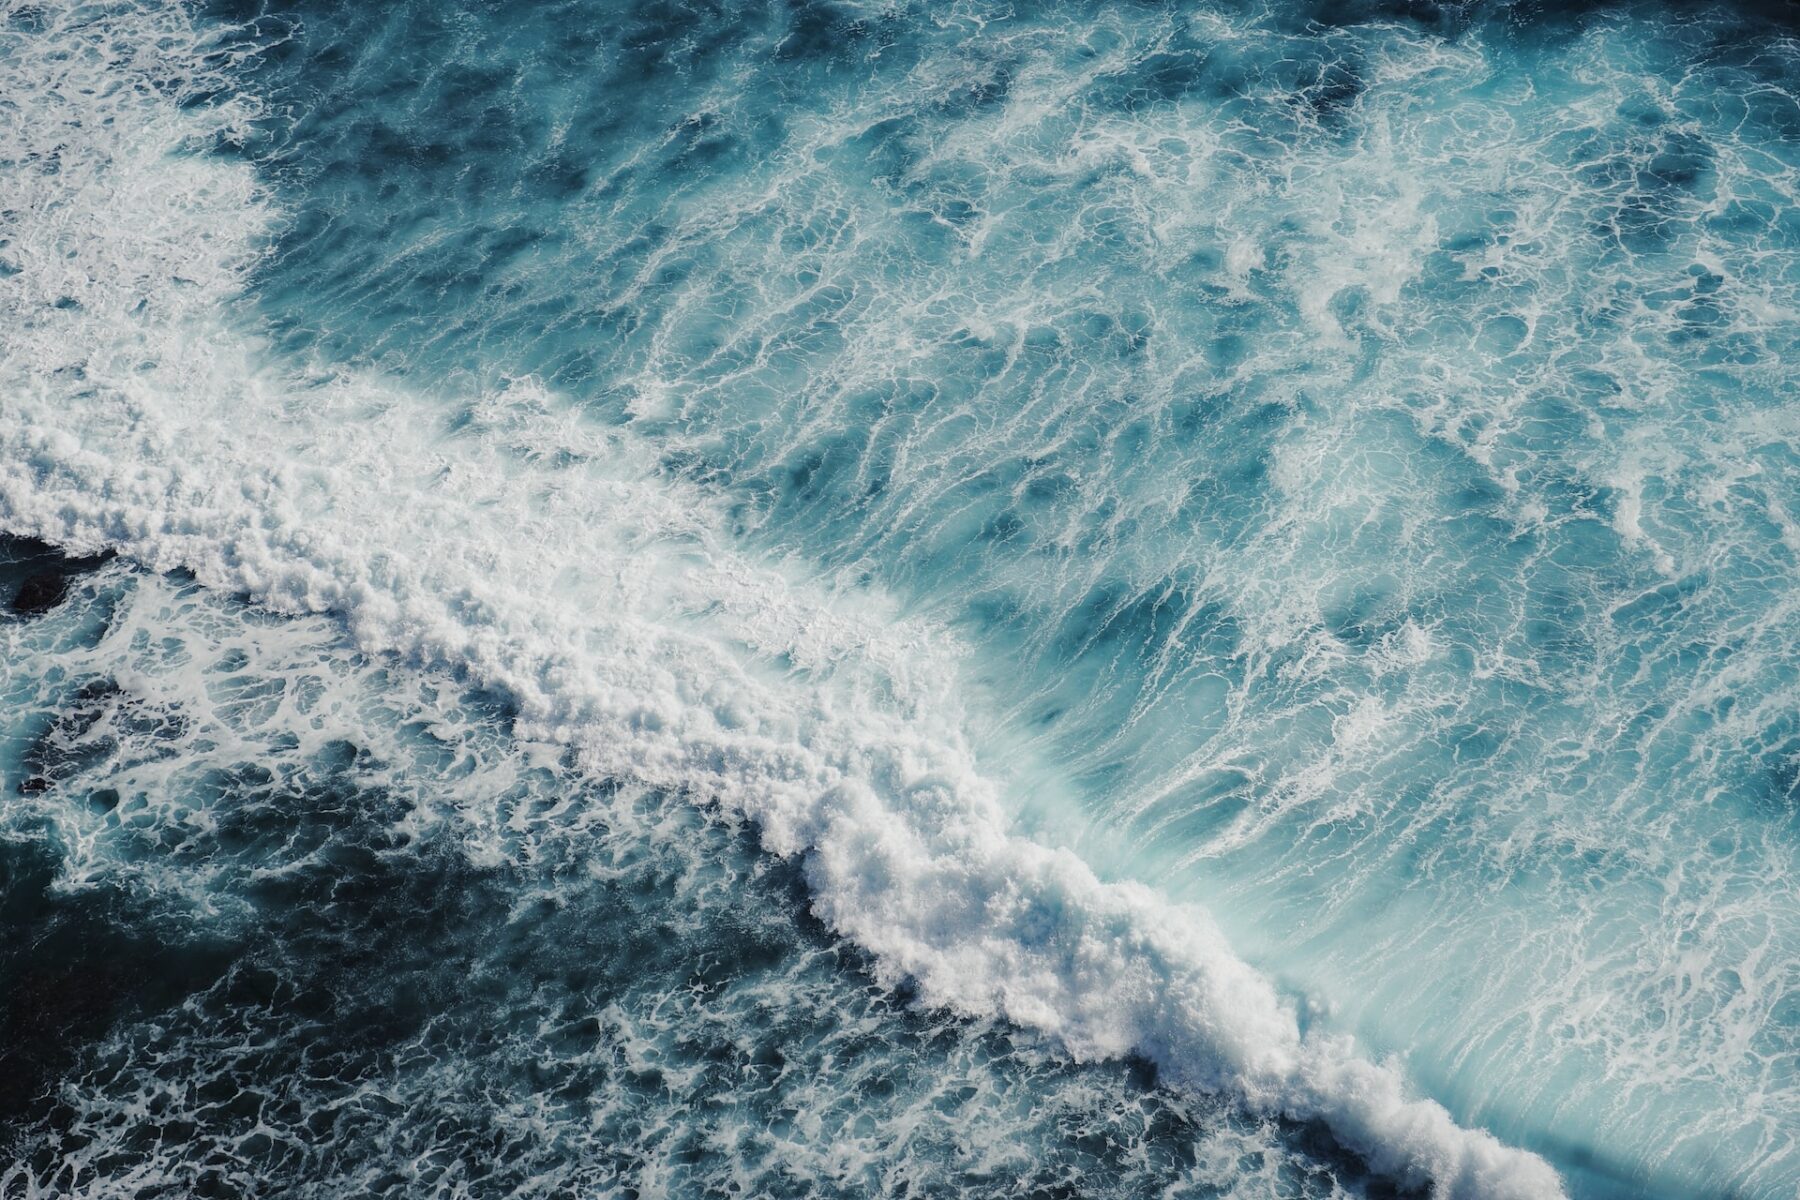 birds eye view of a stormy, lively ocean.